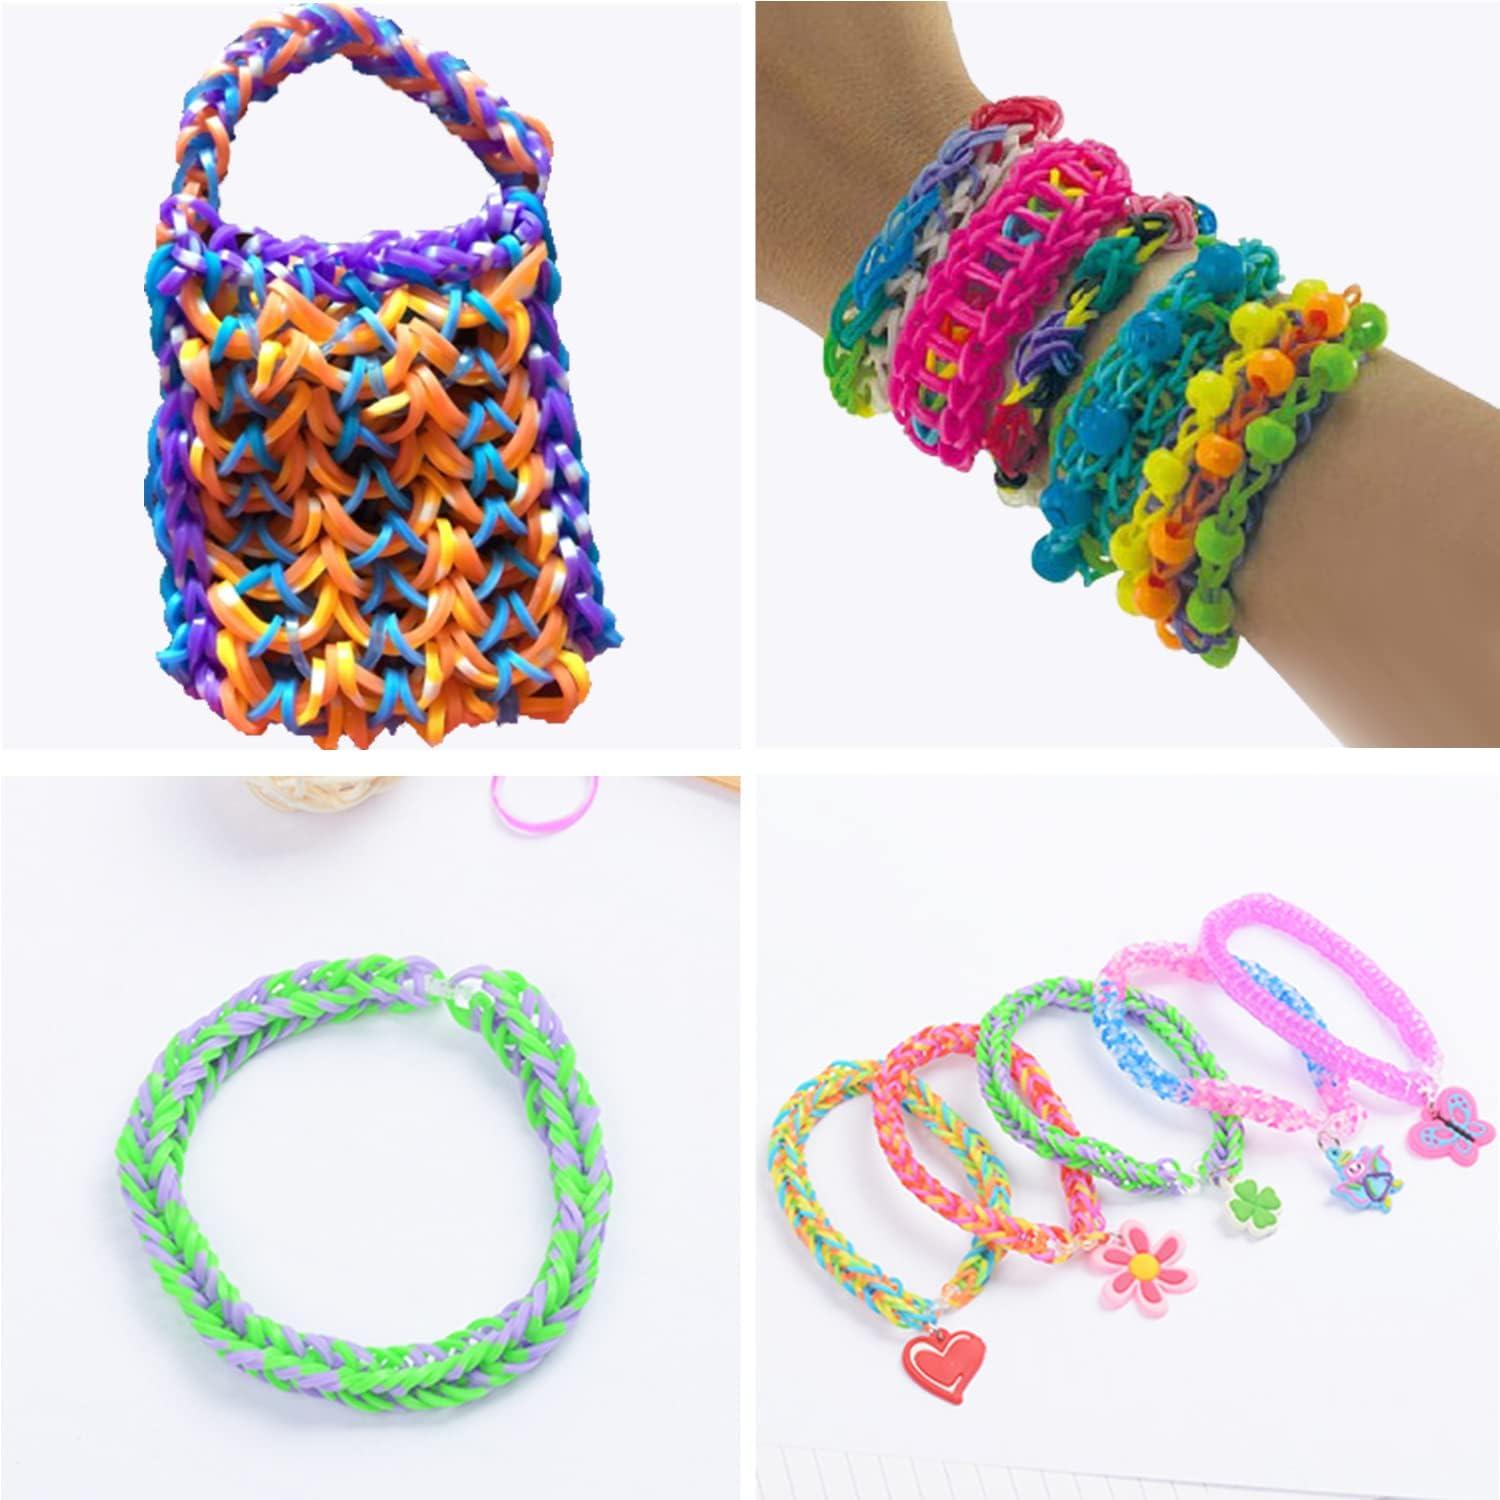 Amazon.com: NEXBOX Toys and Crafts for Girls Age 6-8 8-12 Year Old -  Friendship Bracelet Making Kit and Birthday Gifts for Kids and Teens,  String Maker Kit and Great Presents : Toys & Games